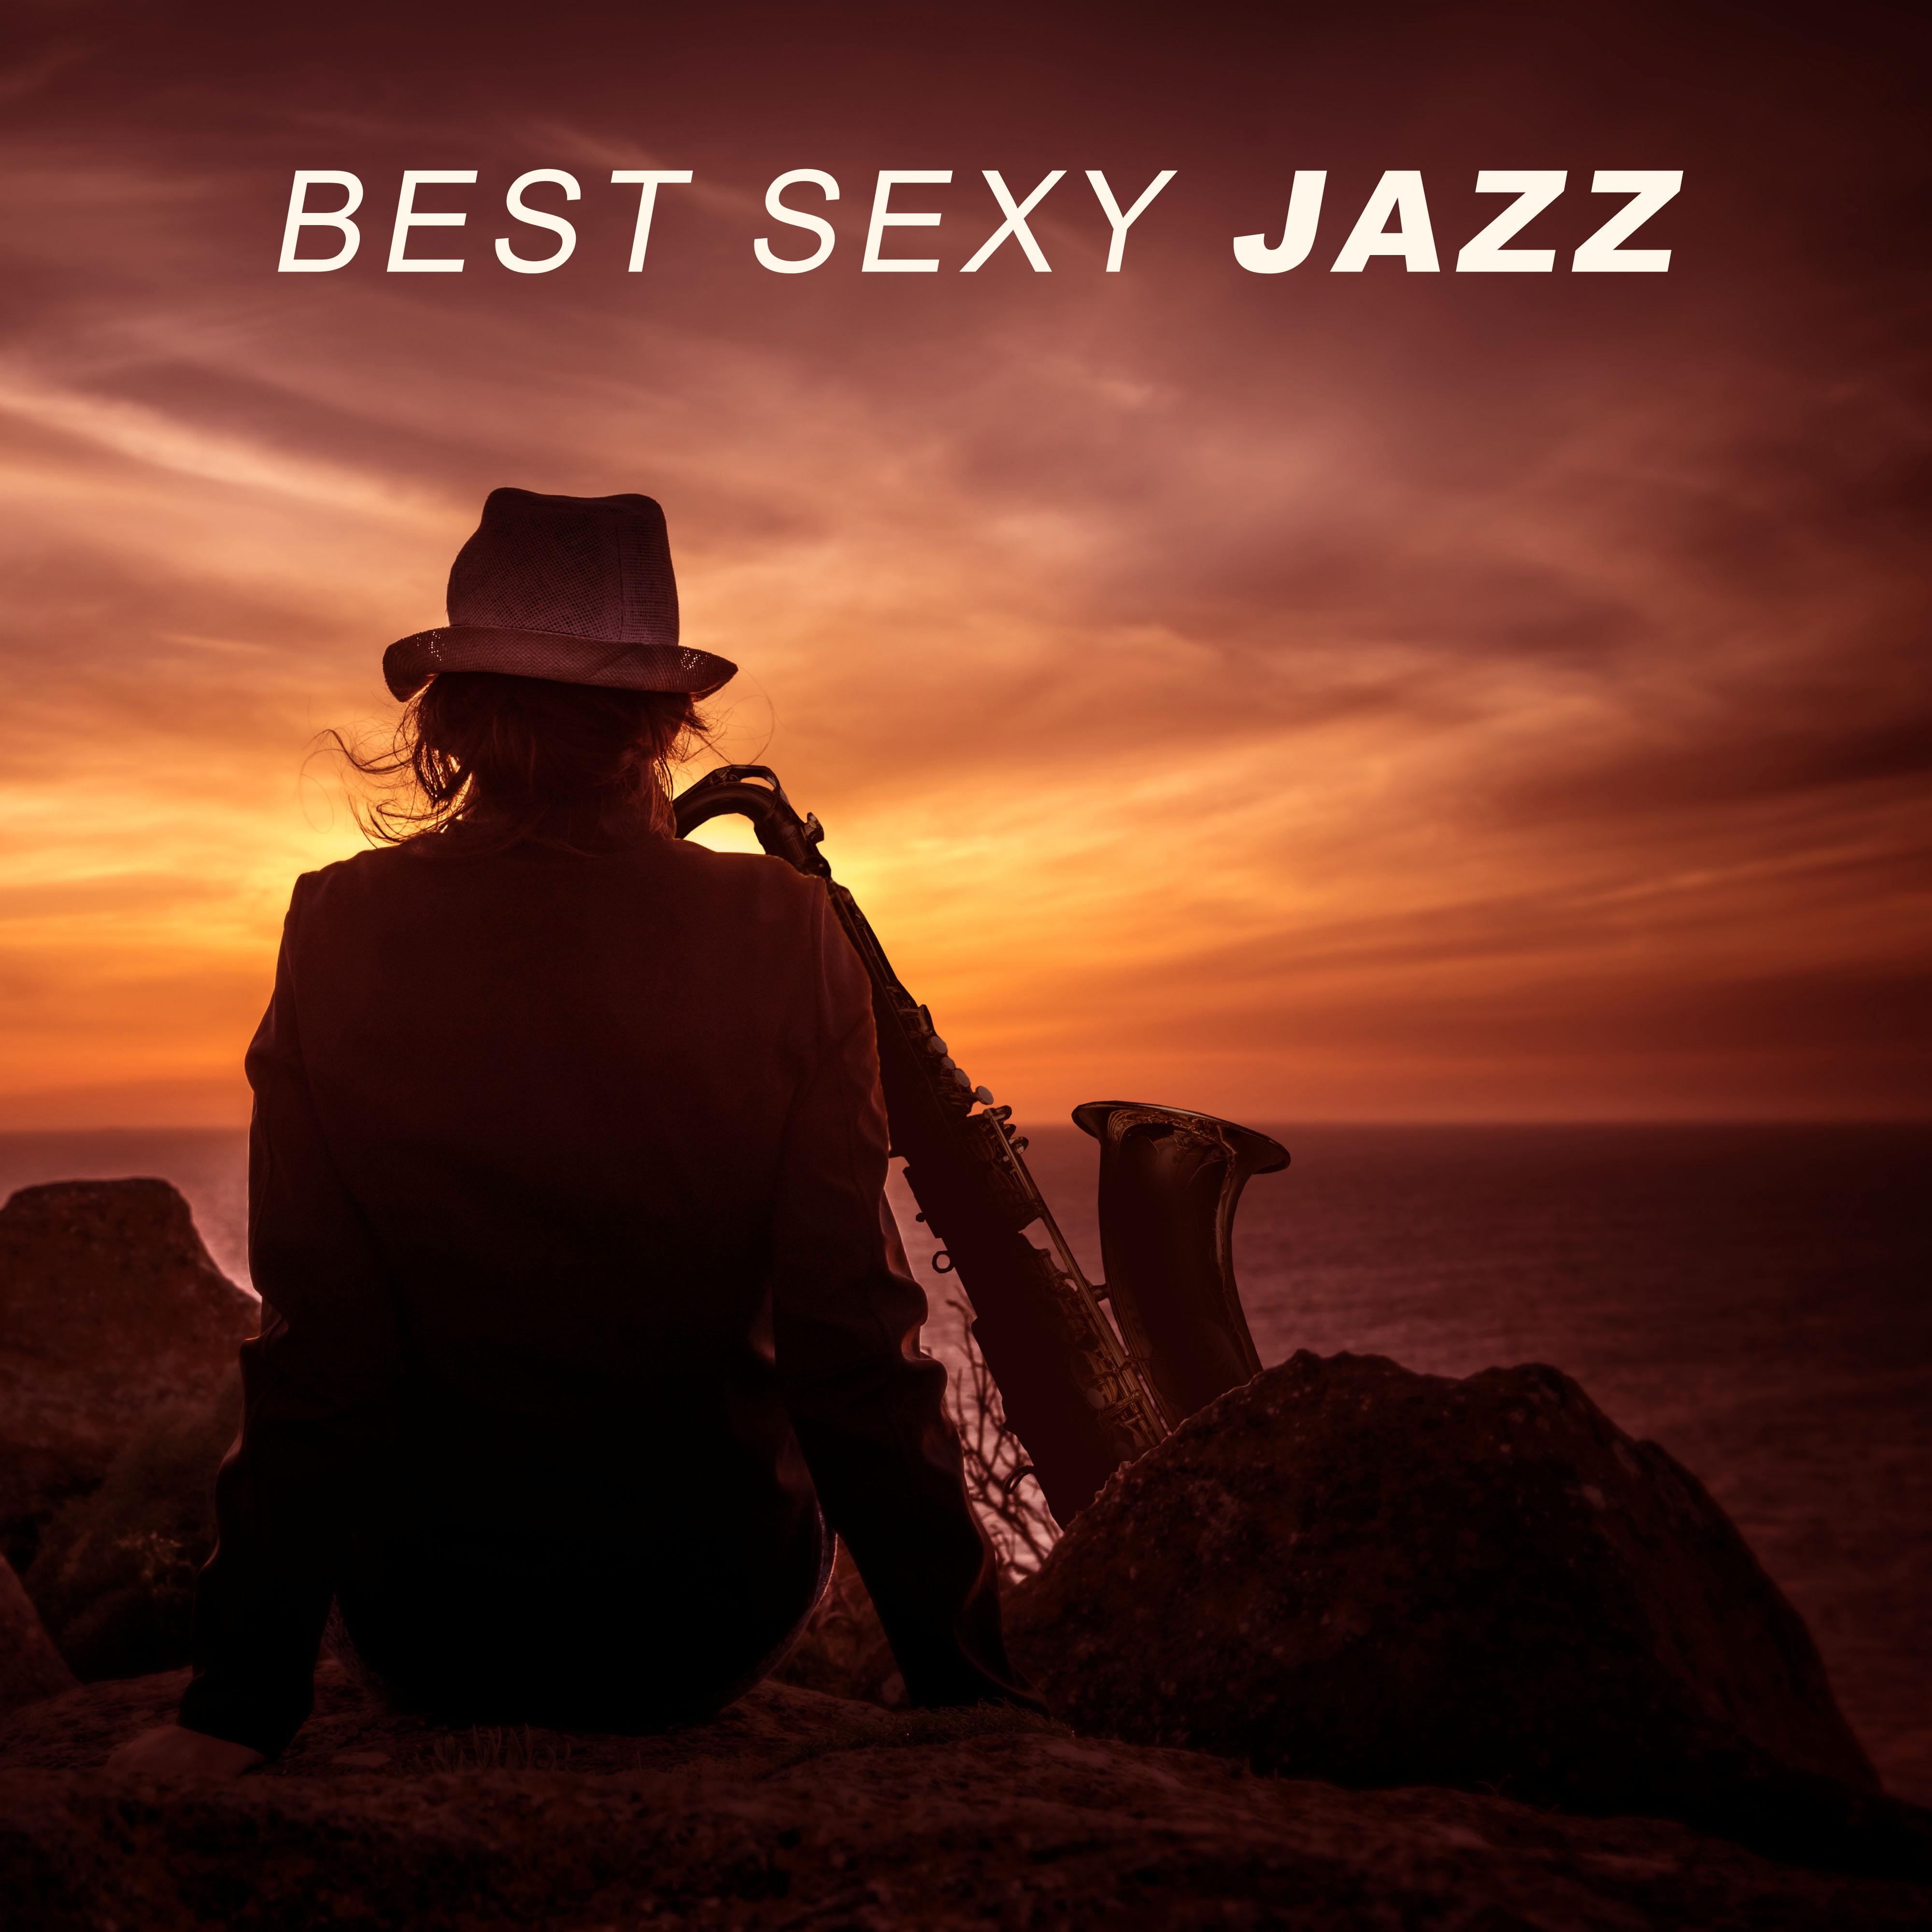 Best **** Jazz – Erotic Lounge Piano, Foreplay, Sweet Jazz Sounds, Romantic Moments, Time for Two